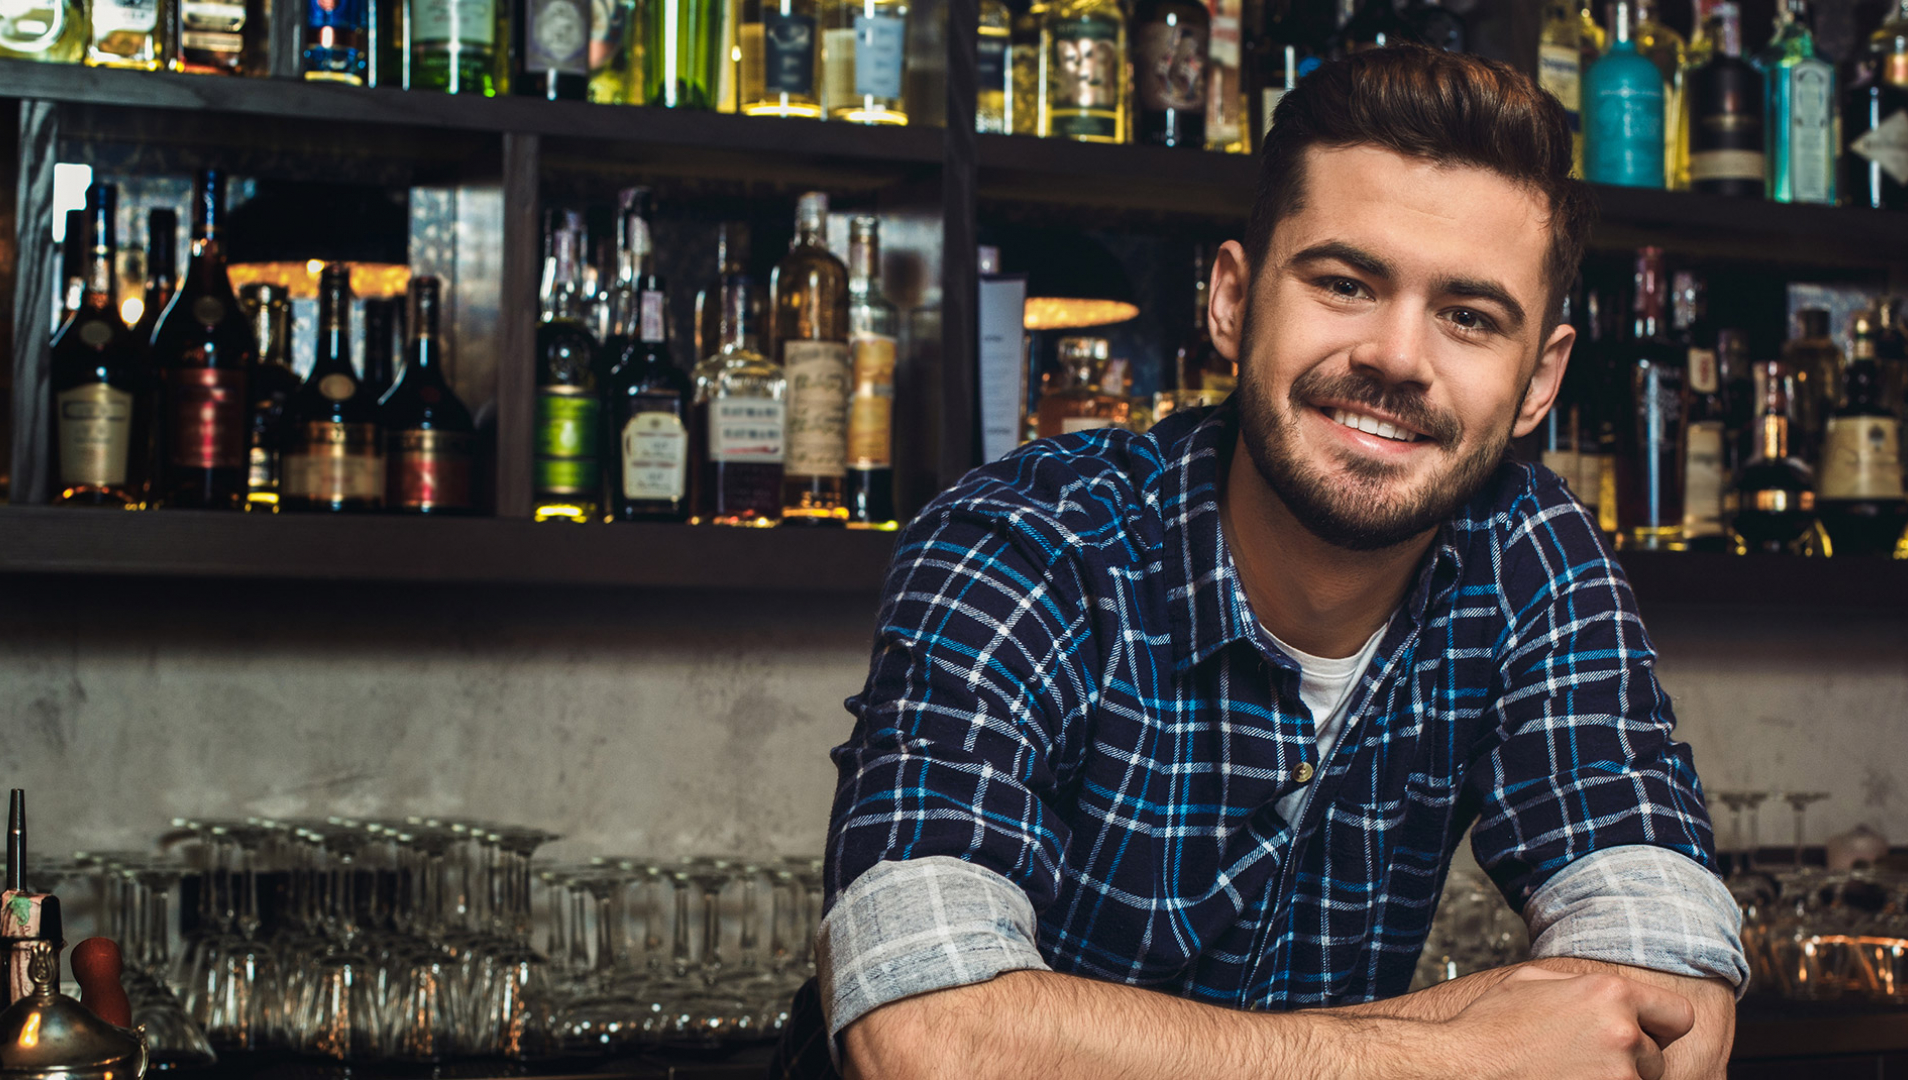 A male bartender smiling while working at a bar.